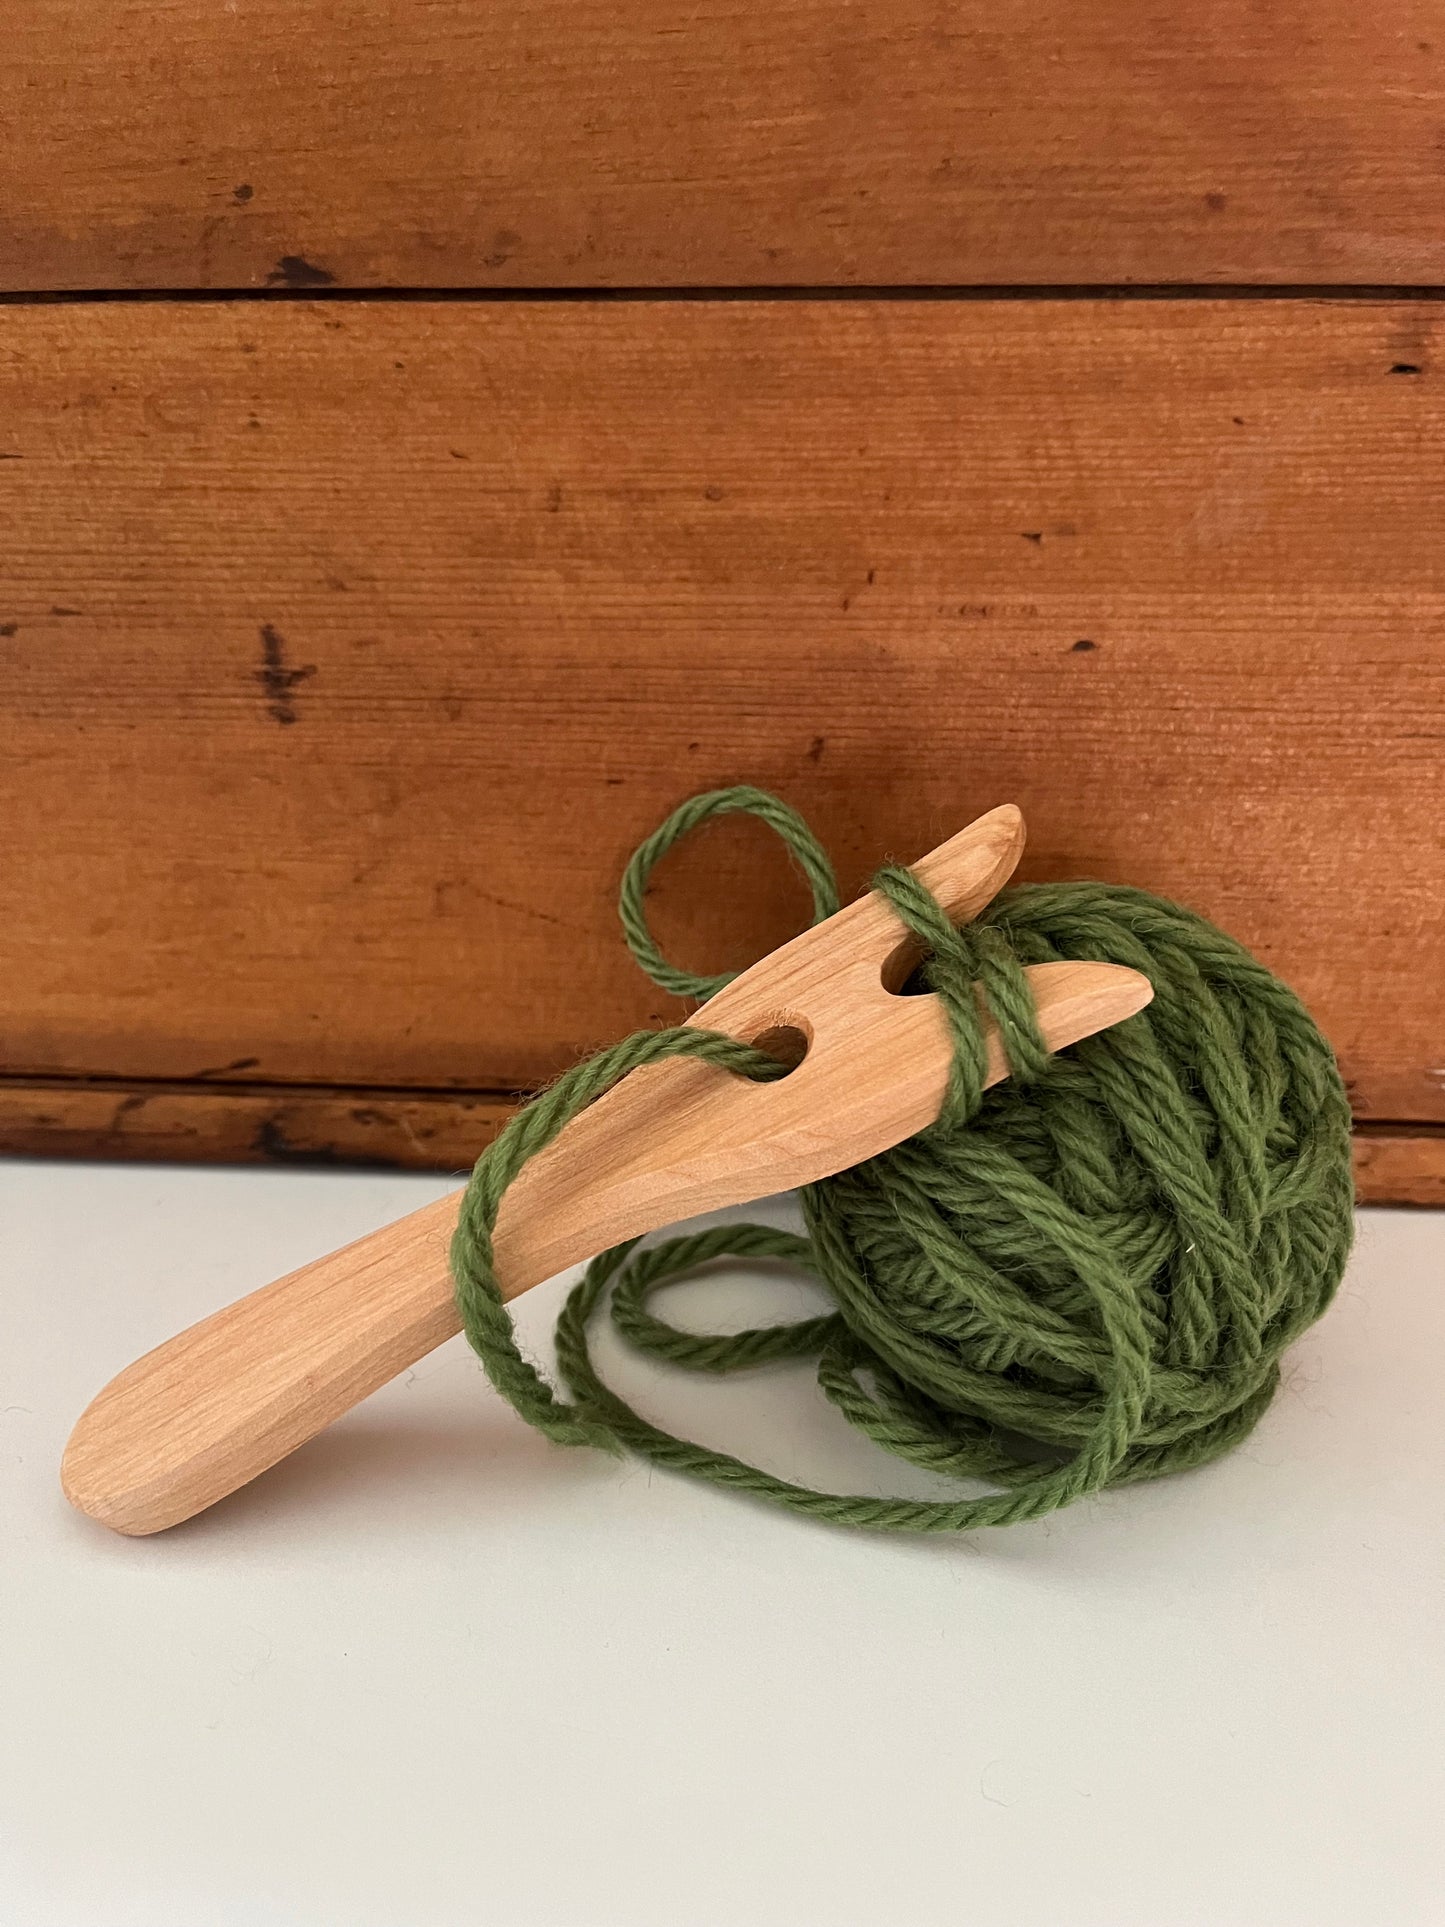 Crafting Tool - KNITTING FORK for wool ropes!